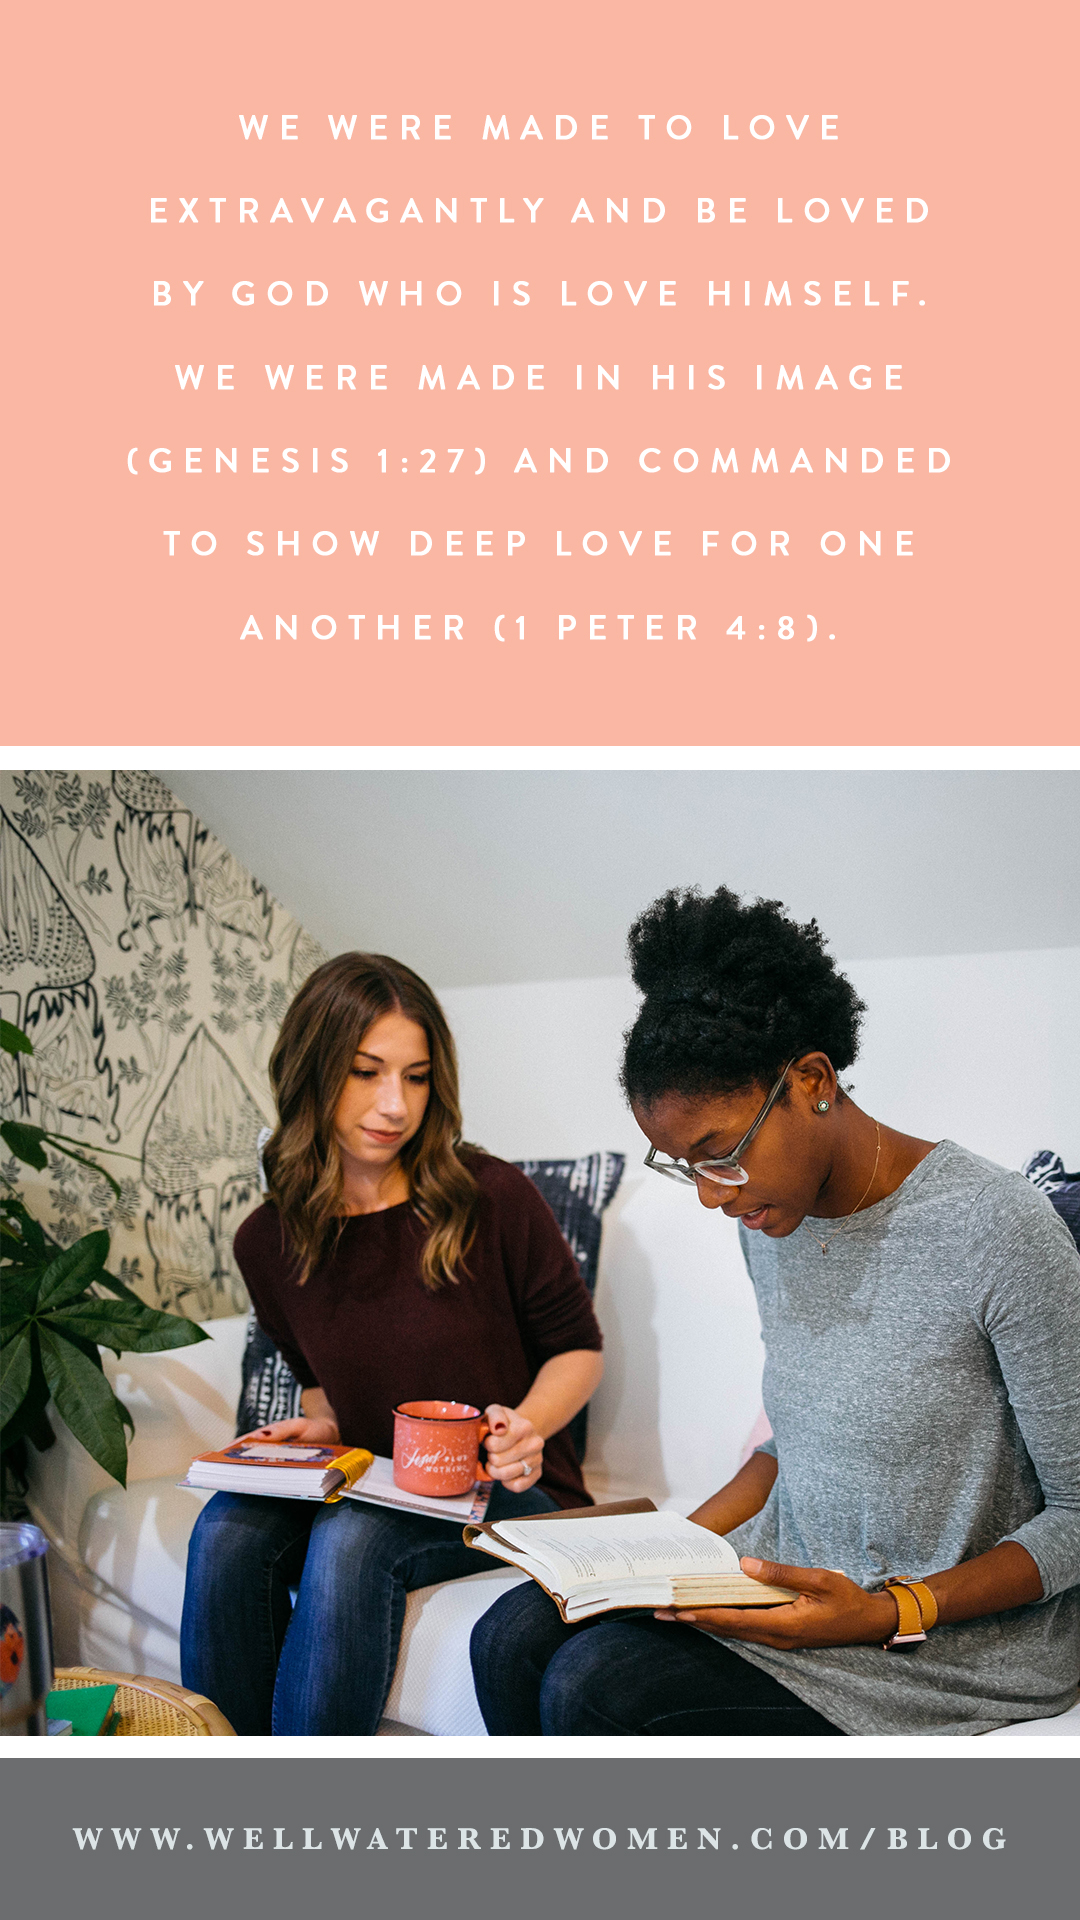 We were made to love extravagantly and be loved by God who is Love Himself. We were made in His image (Genesis 1:27) and commanded to show deep love for one another (1 Peter 4:8). Depending on the translation you’re reading, the word “love” is mentioned anywhere from 300–600 times throughout Scripture. God is serious about love!